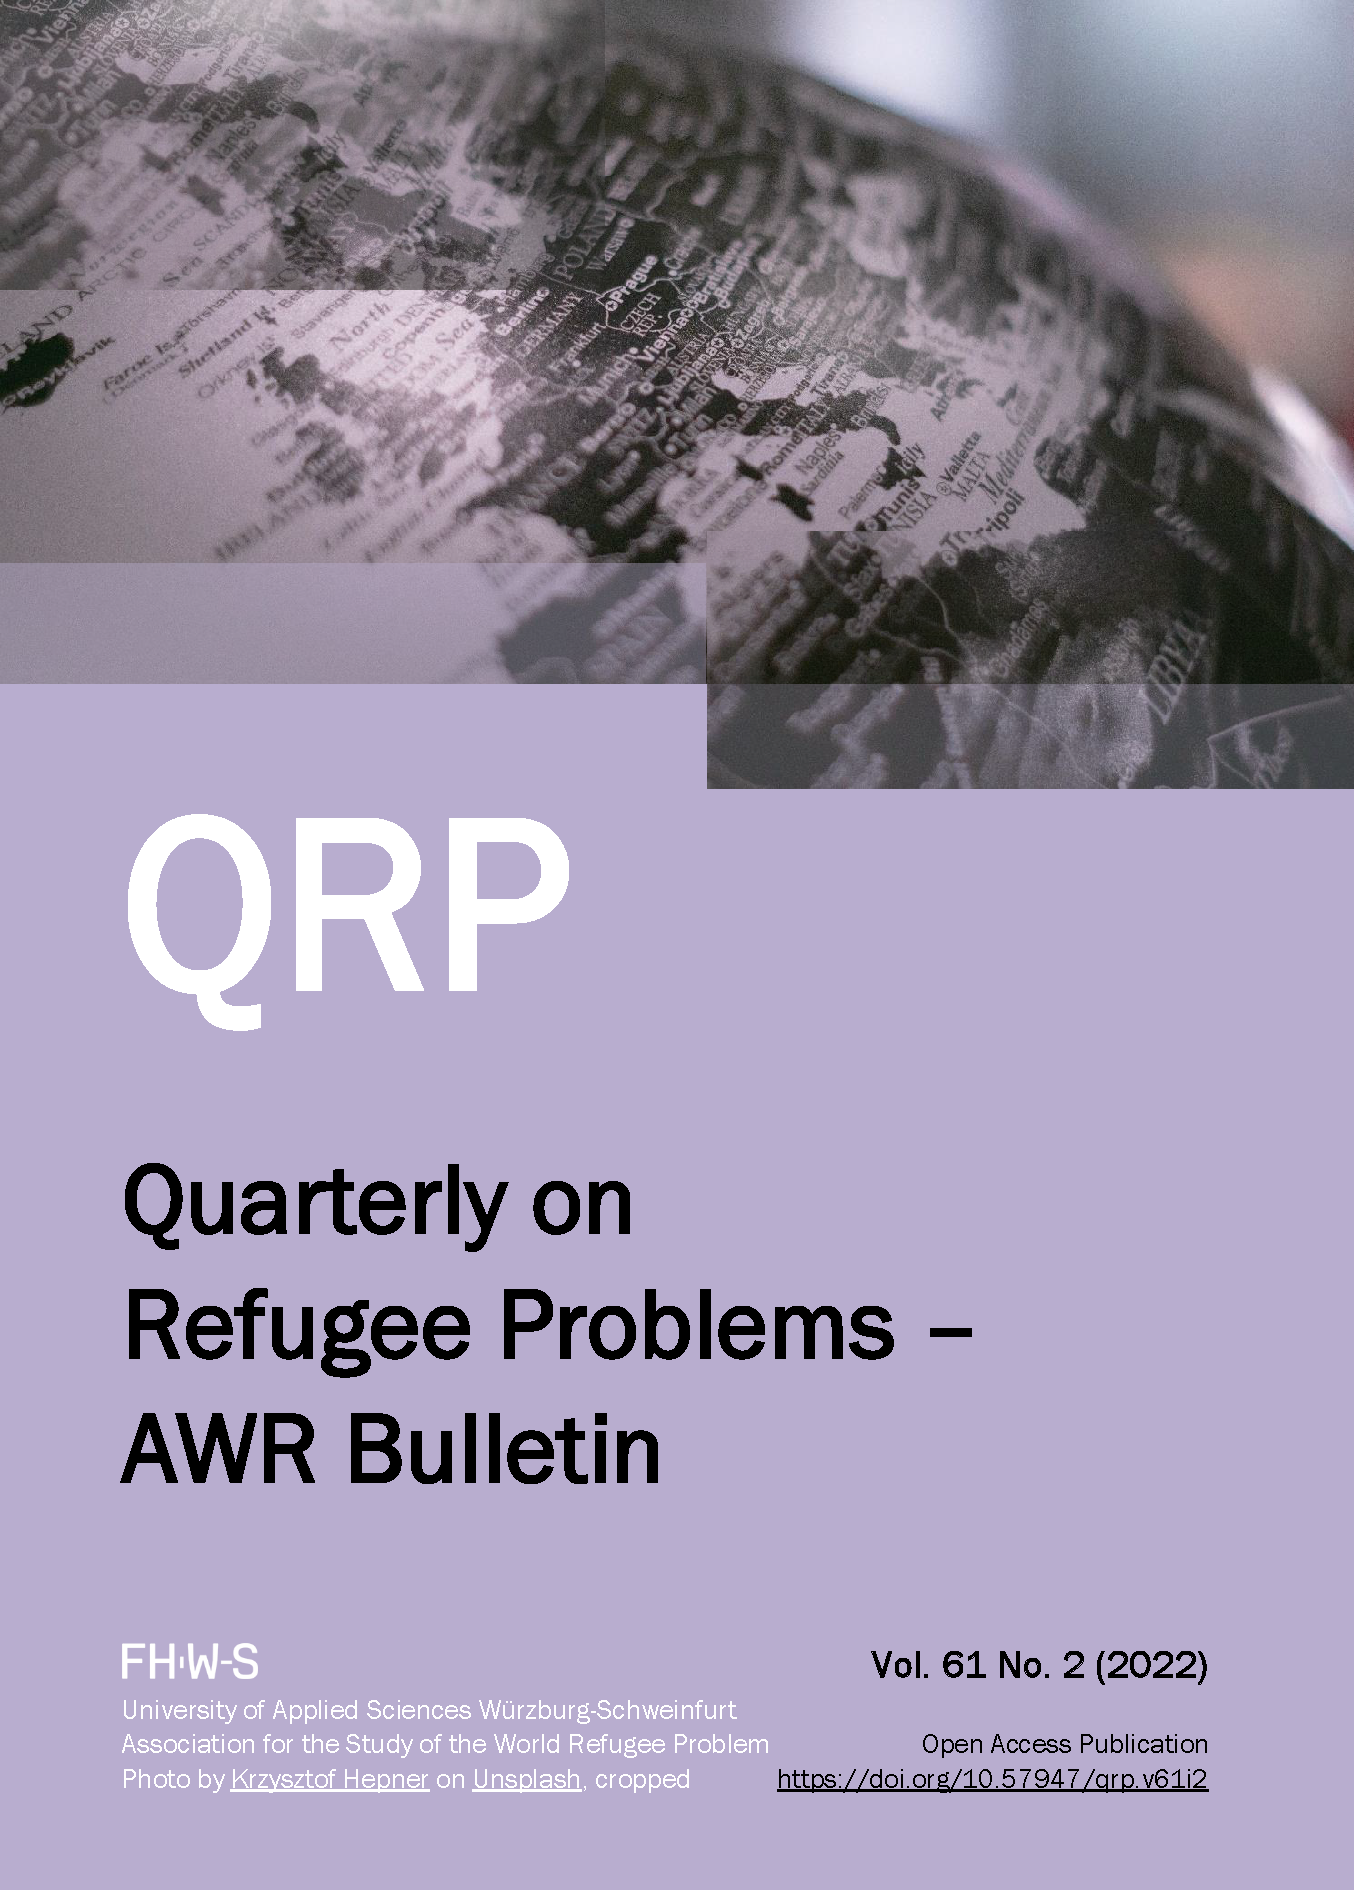 The cover of the 2022, volume 61, second issue of the Quarterly on Refugee Problems - AWR Bulletin